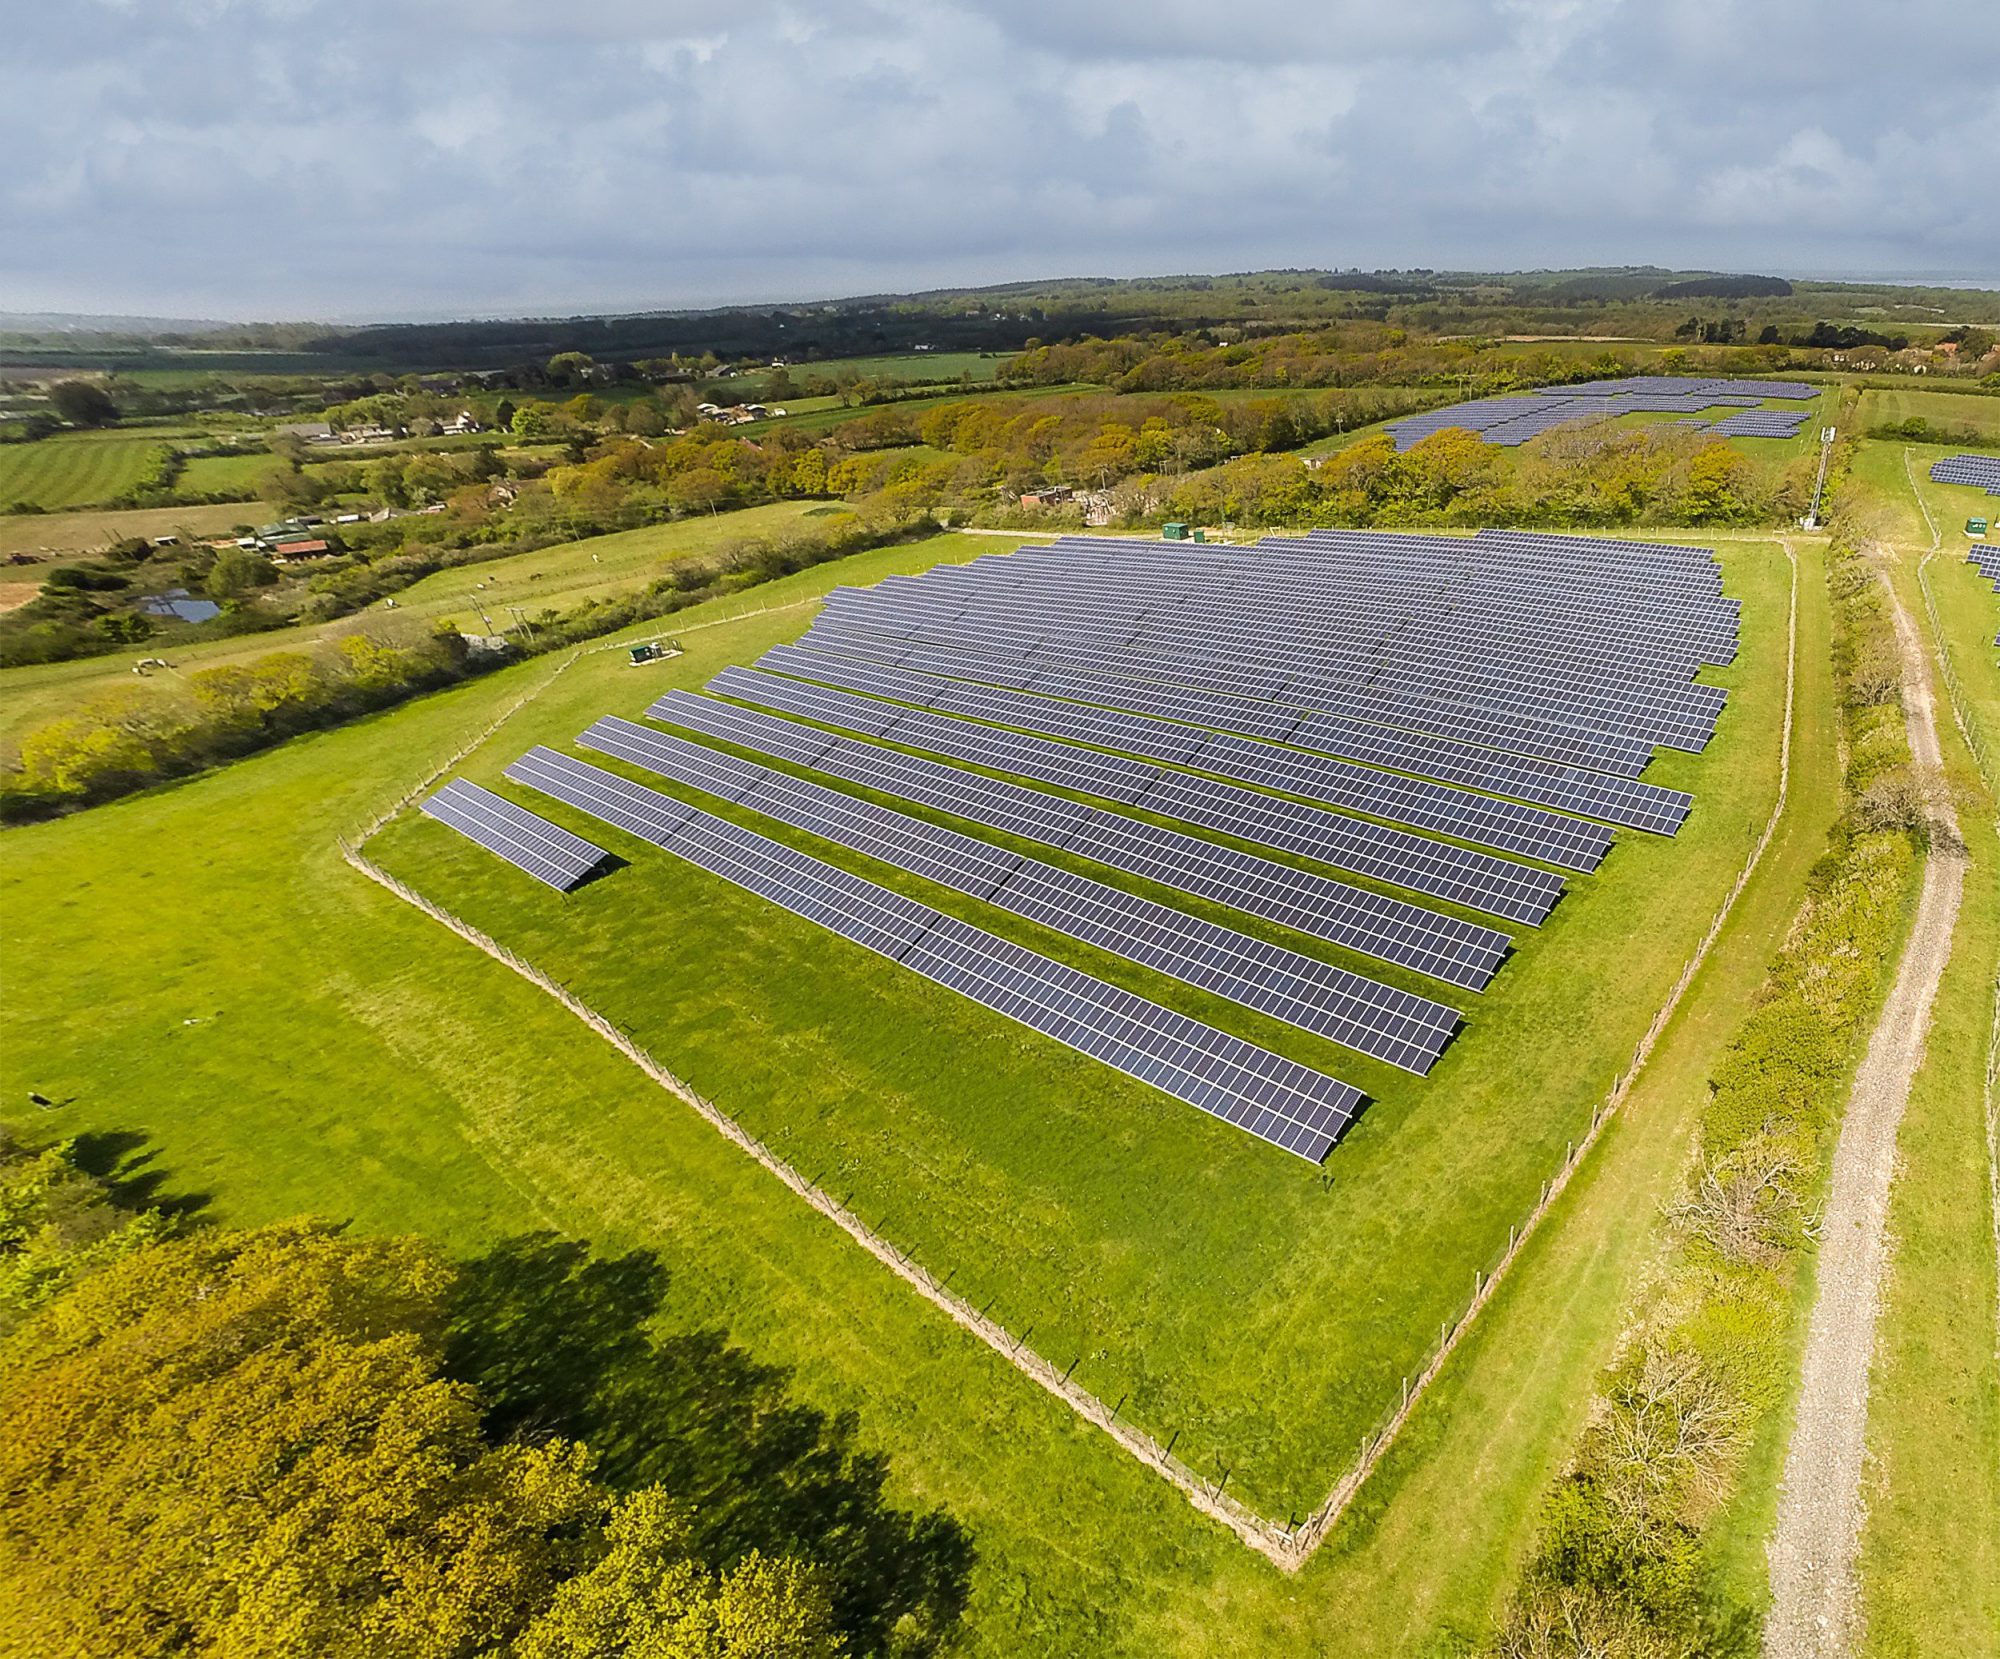 £195,000 released early so community solar farms can help local people face the COVID19 crisis